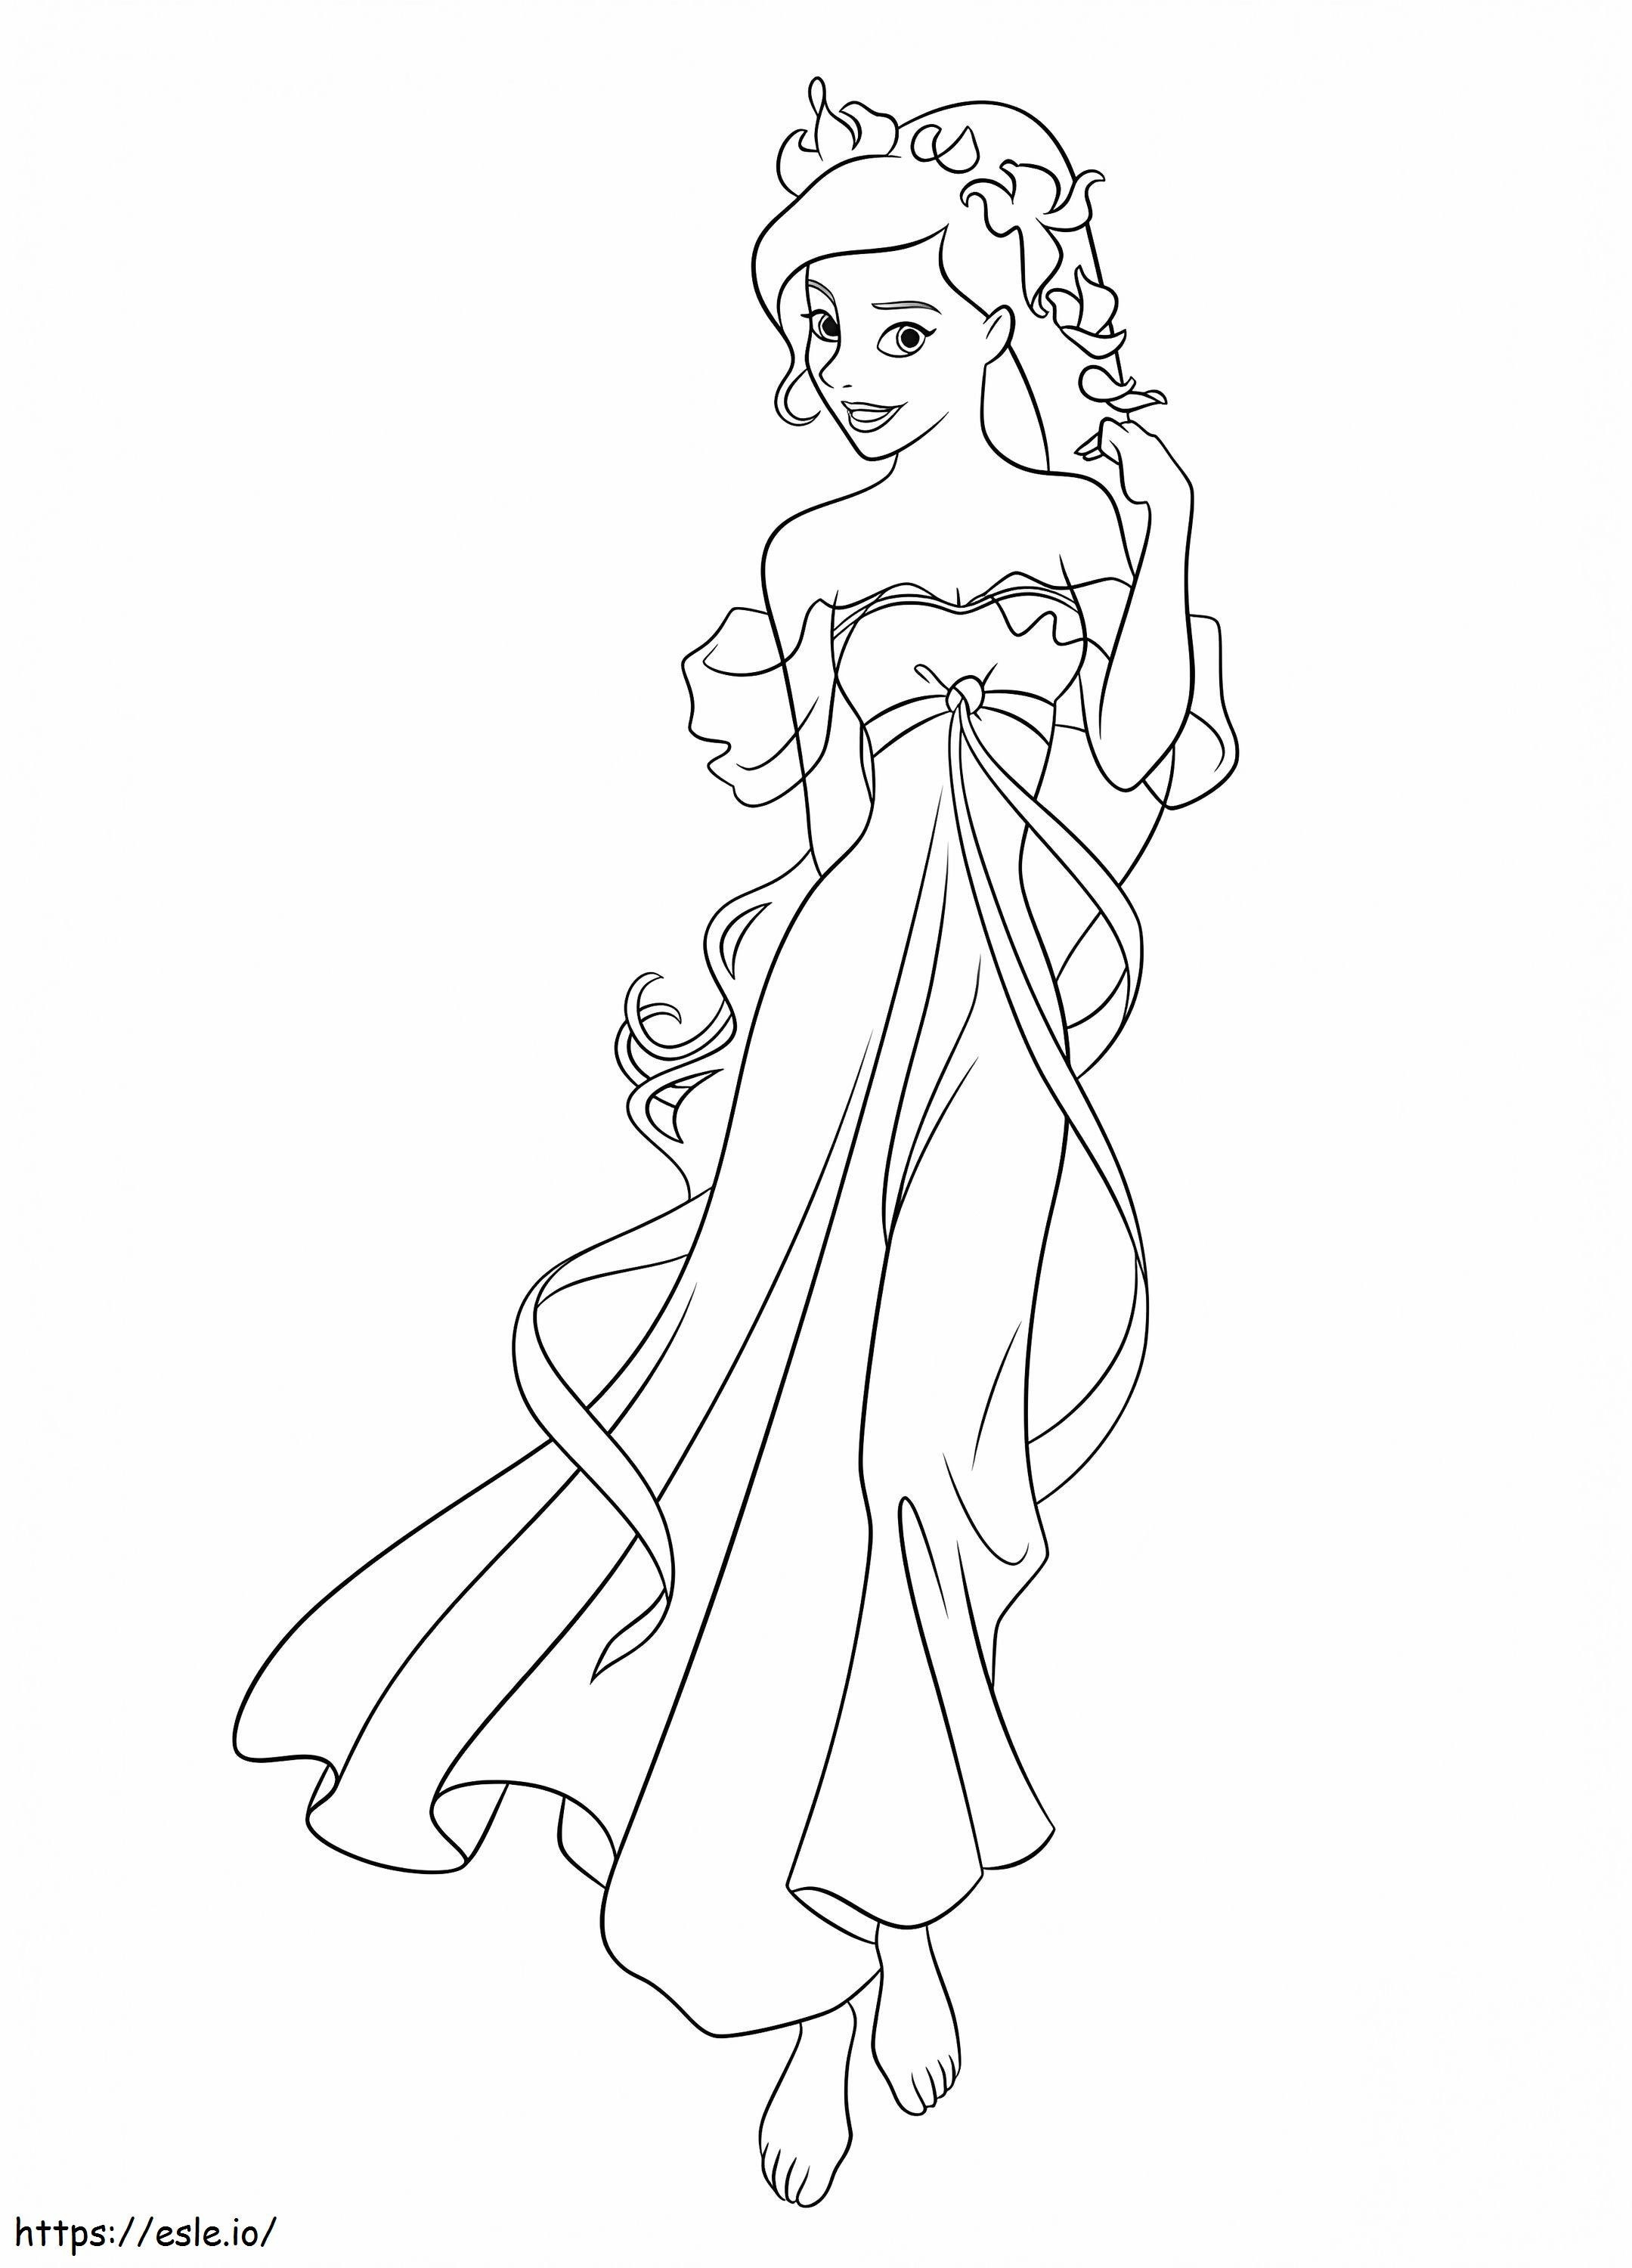 Enchanted Giselle coloring page